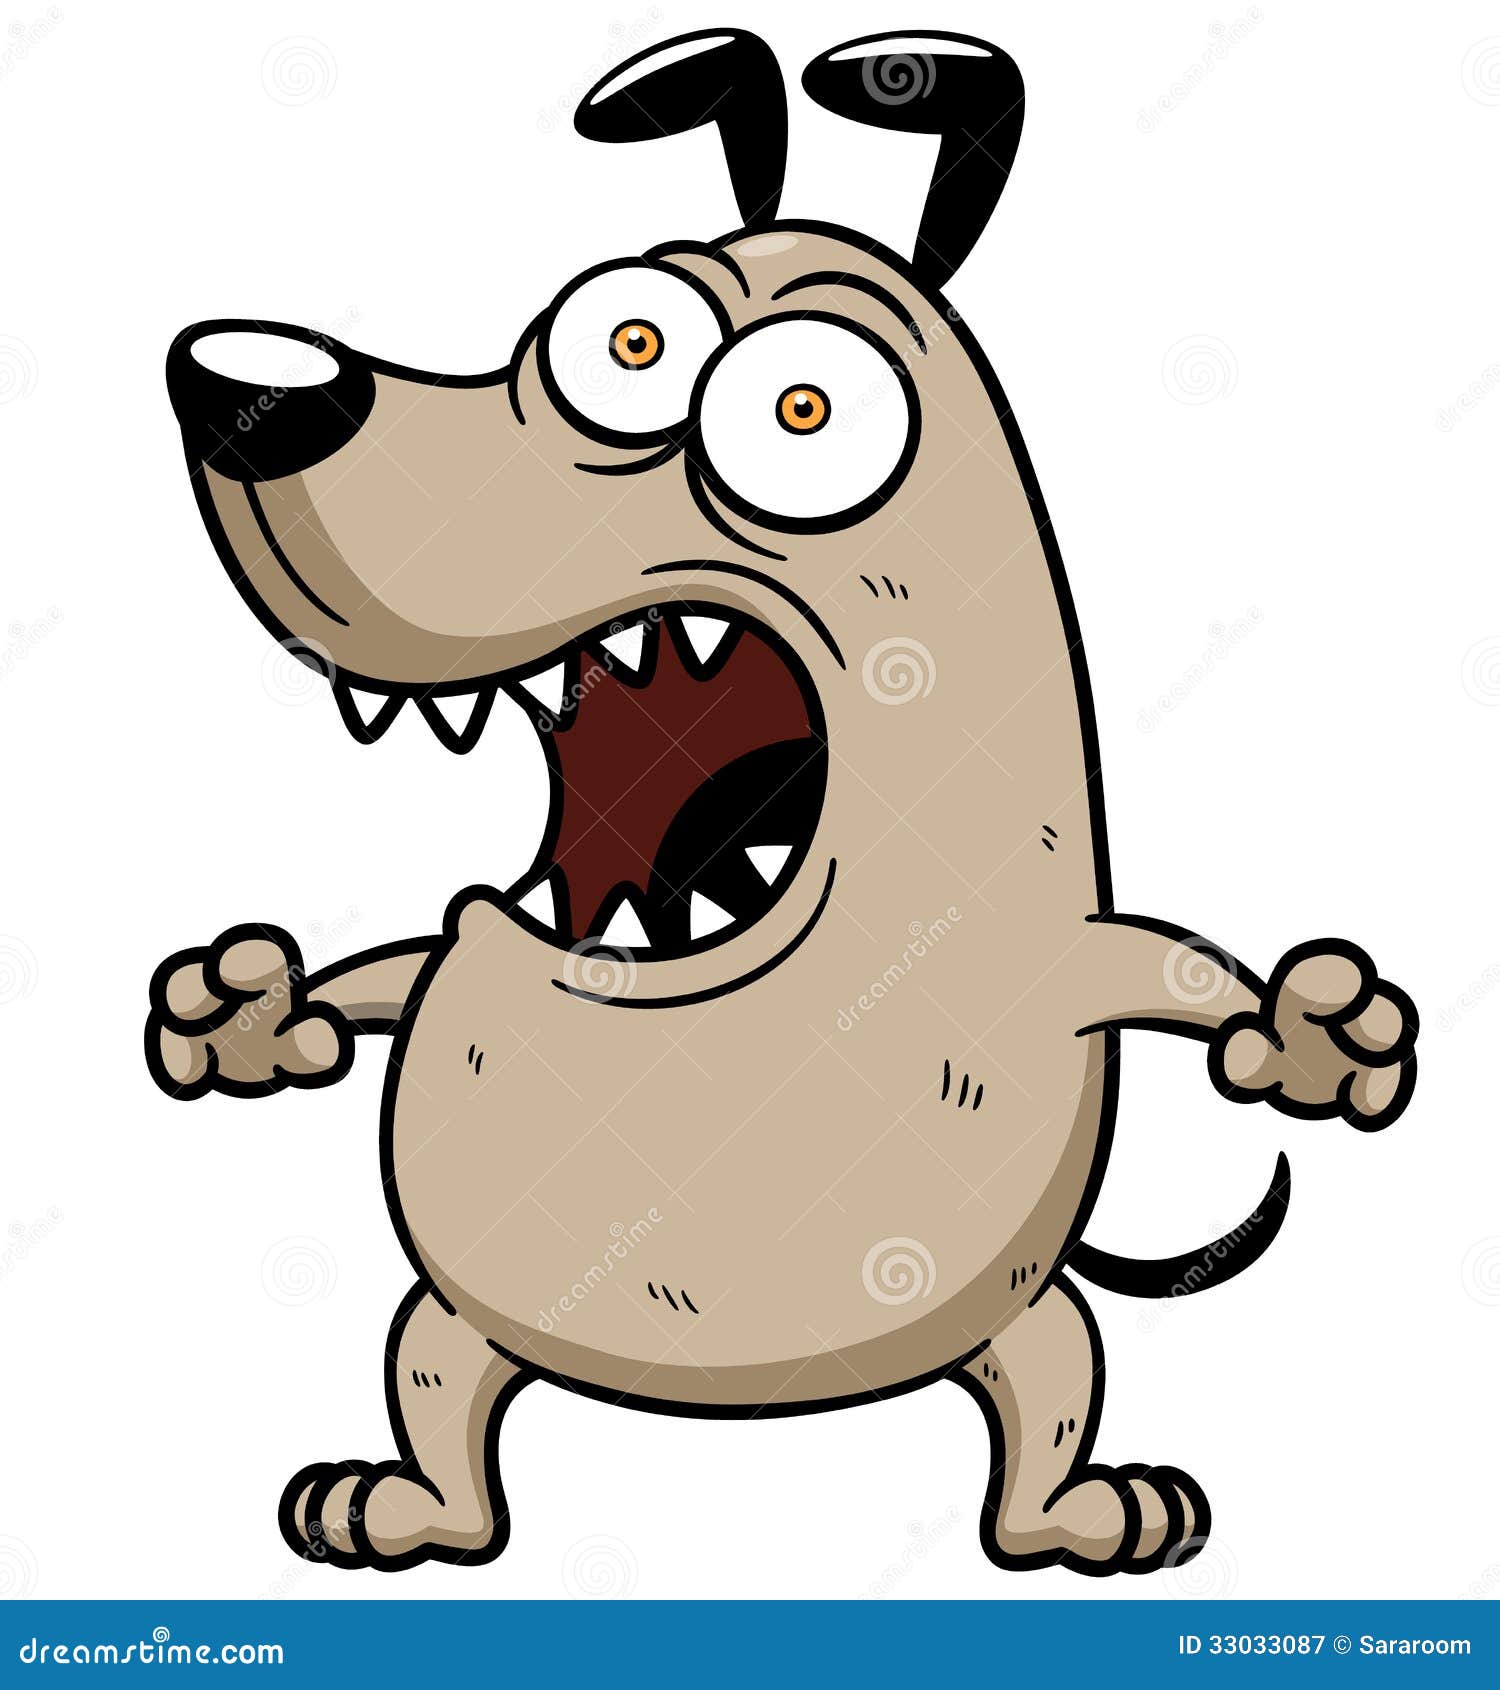 angry dog clipart - photo #27